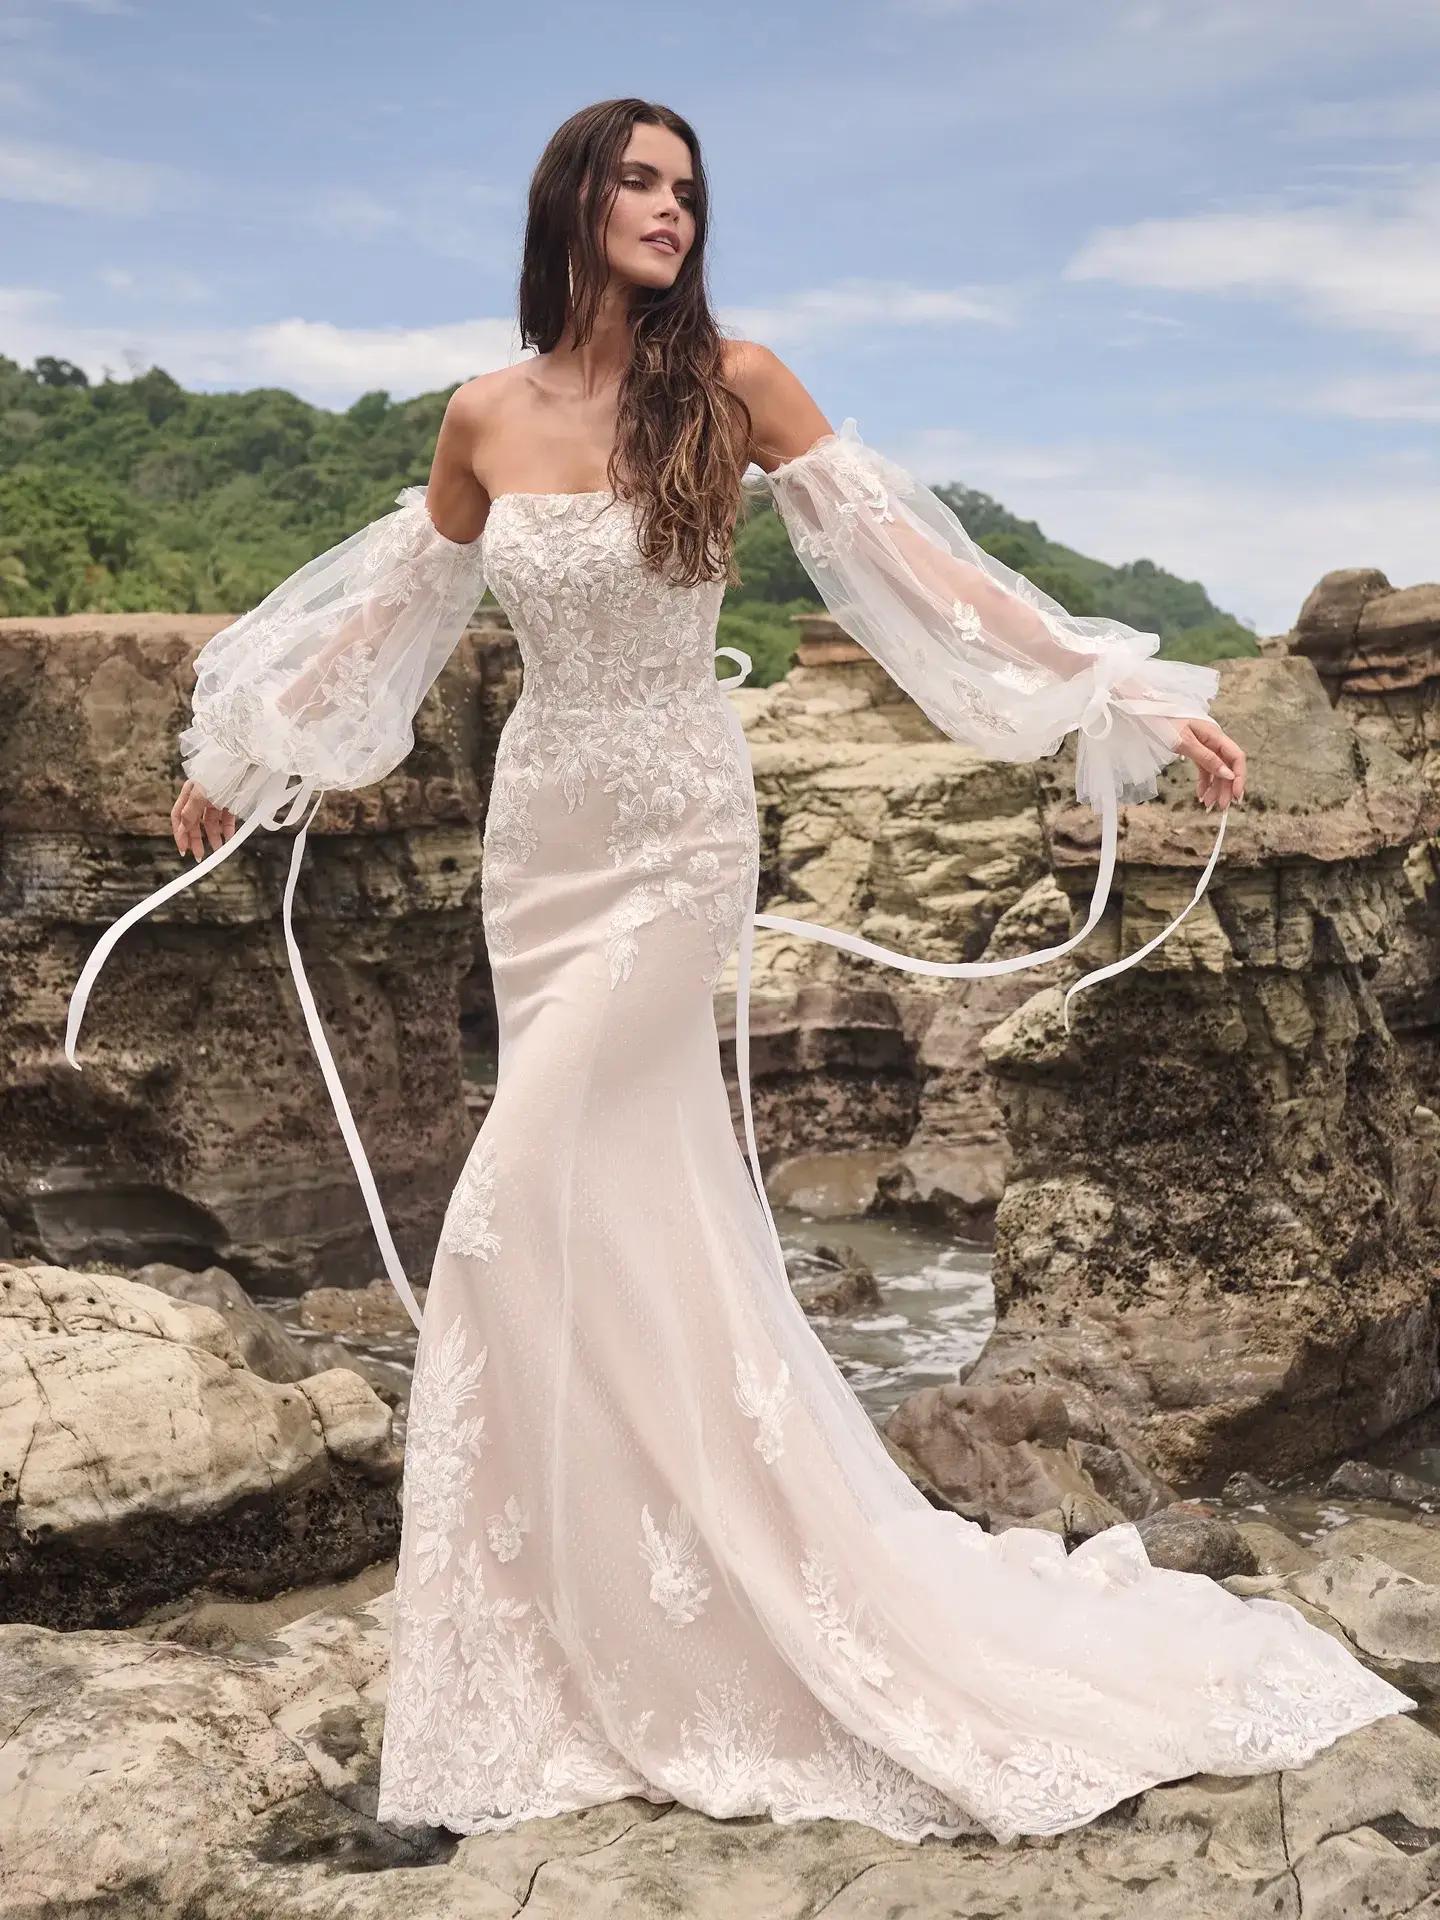 Whimsical Springtime Romance: Choosing the Perfect Wedding Gown Image